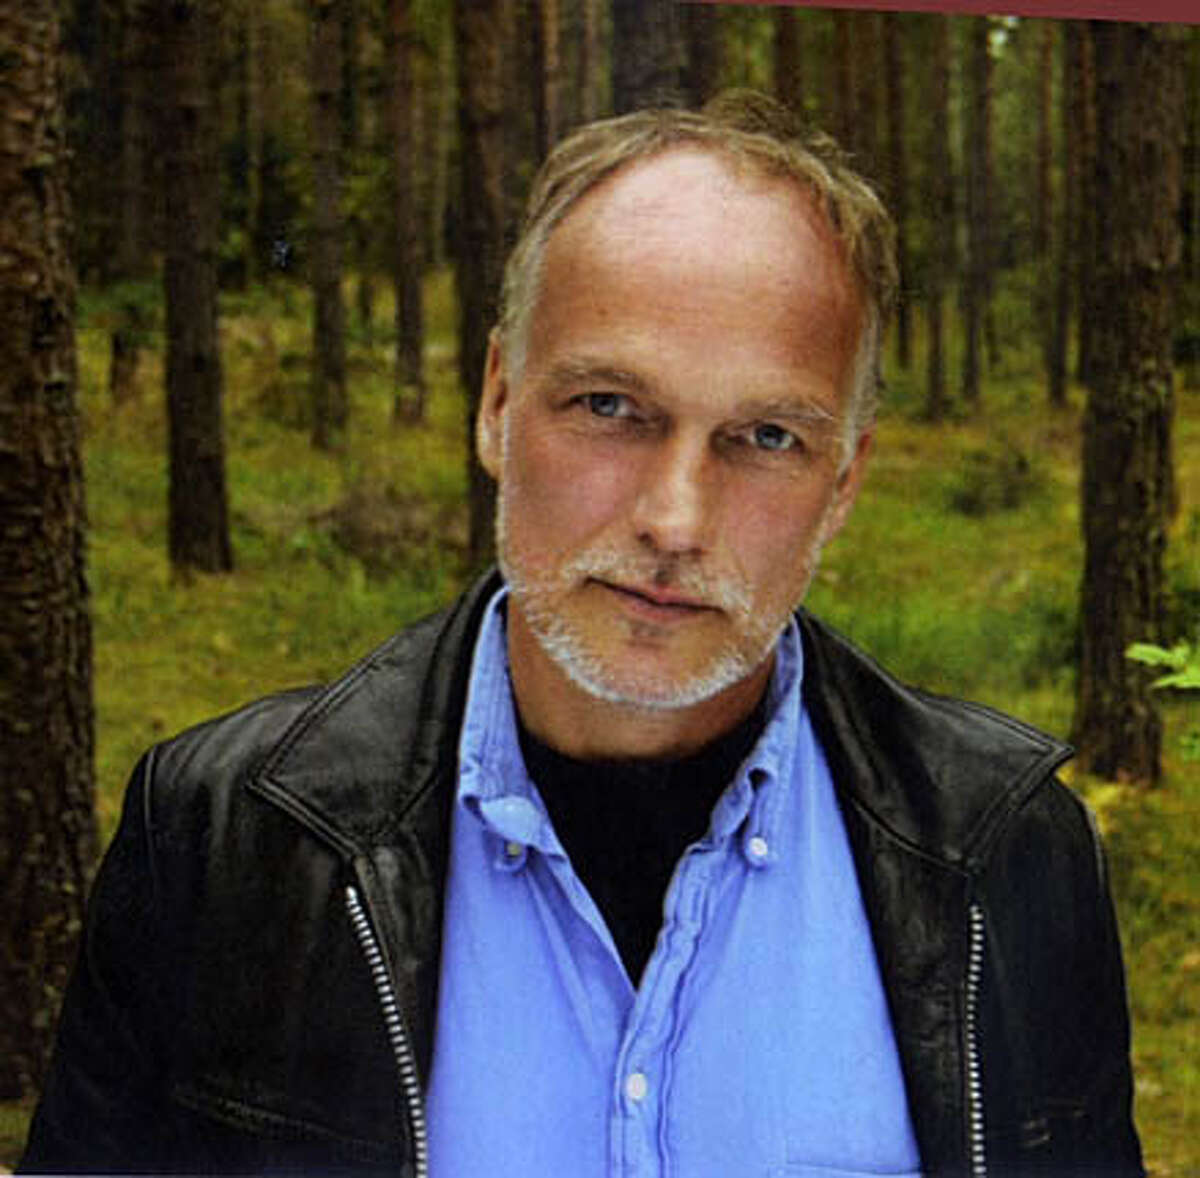 Kjell Eriksson's "The Princess of Burundi" was named Best Swedish Crime Novel in 2002. It is his first novel published in the United States. Masterfile photo by Mark Tomalty